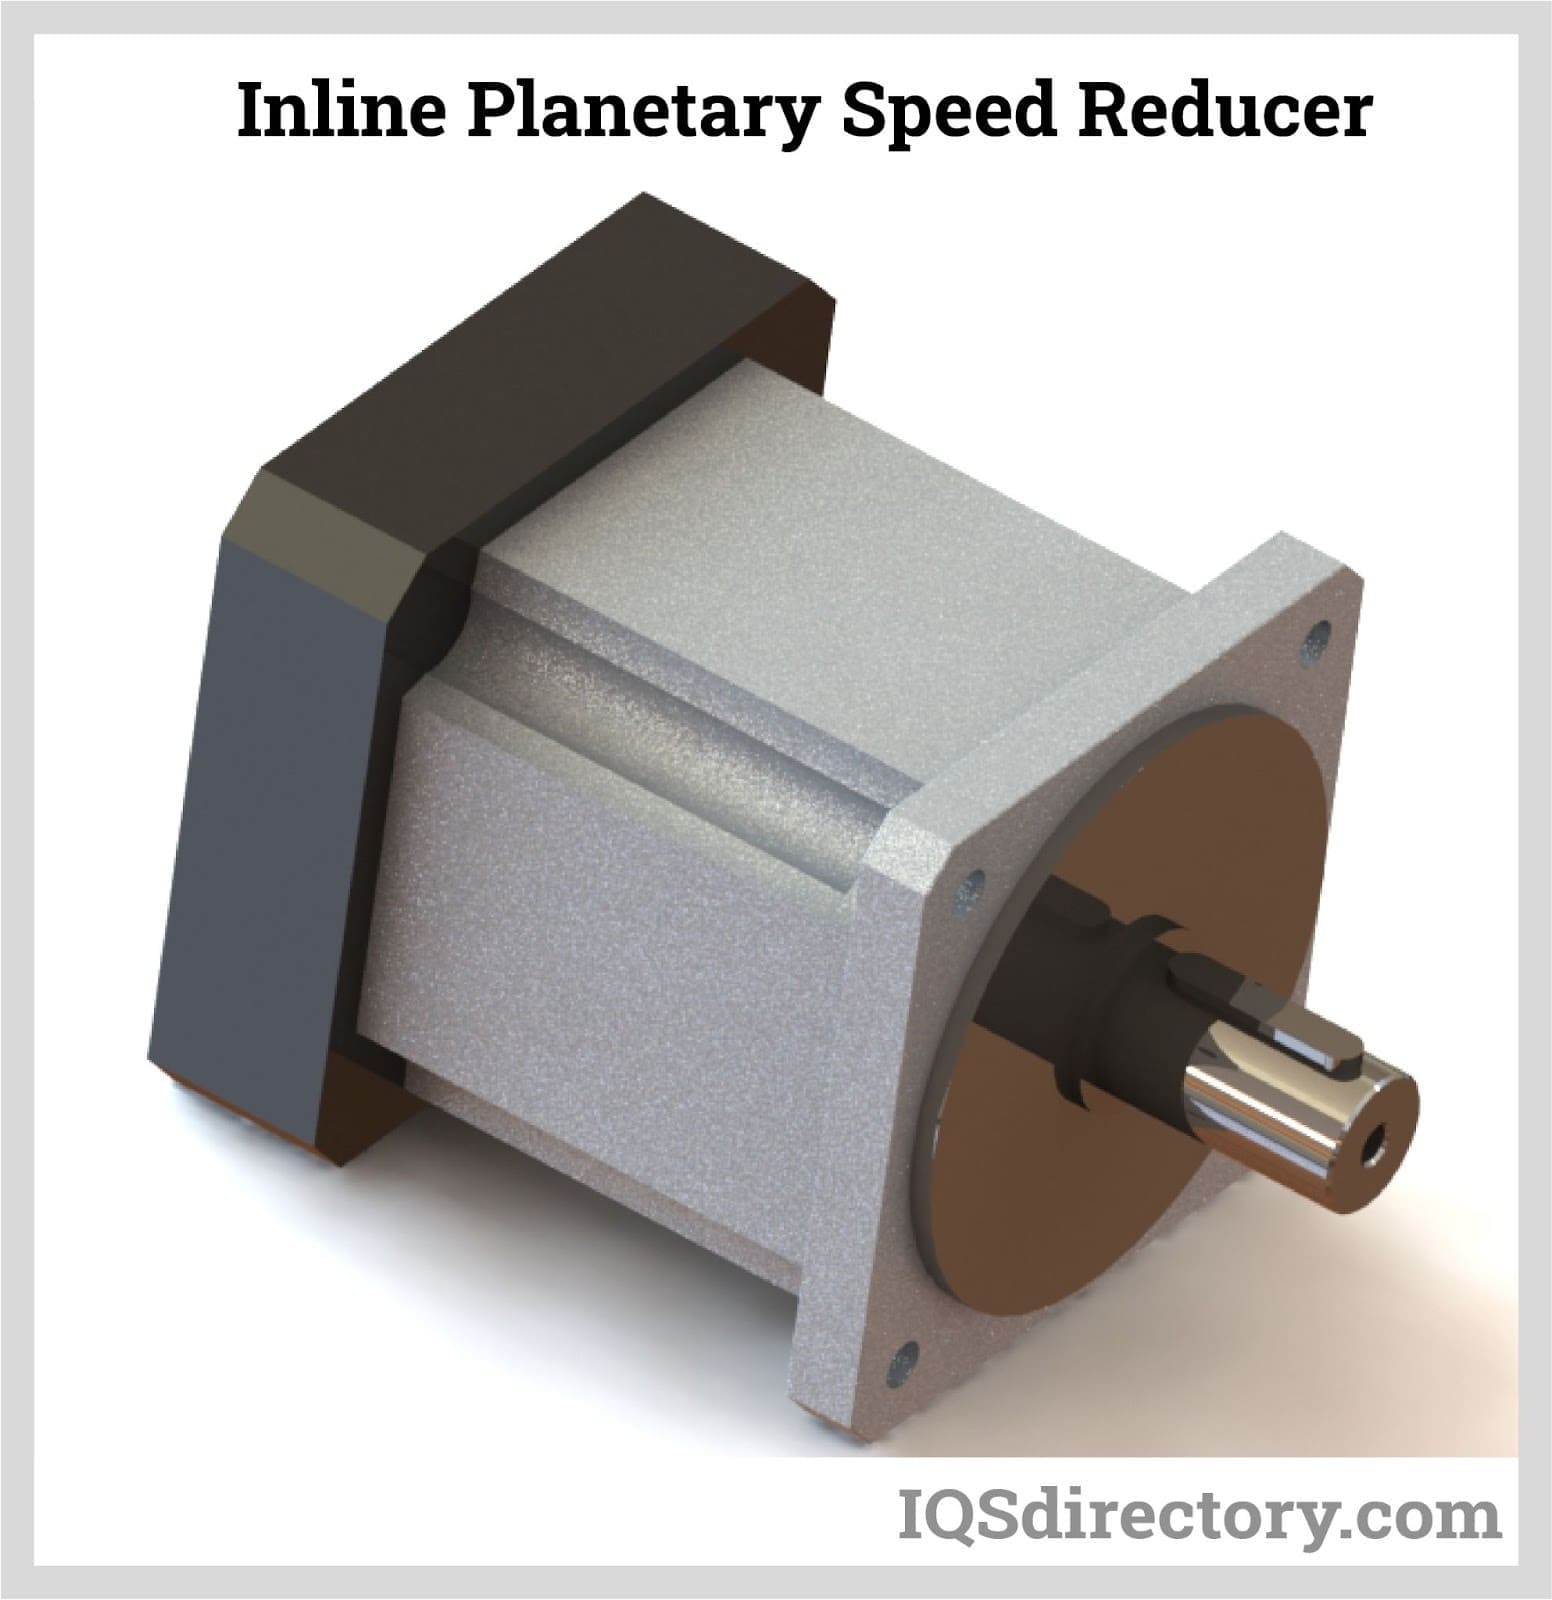 Inline Planetary Speed Reducer